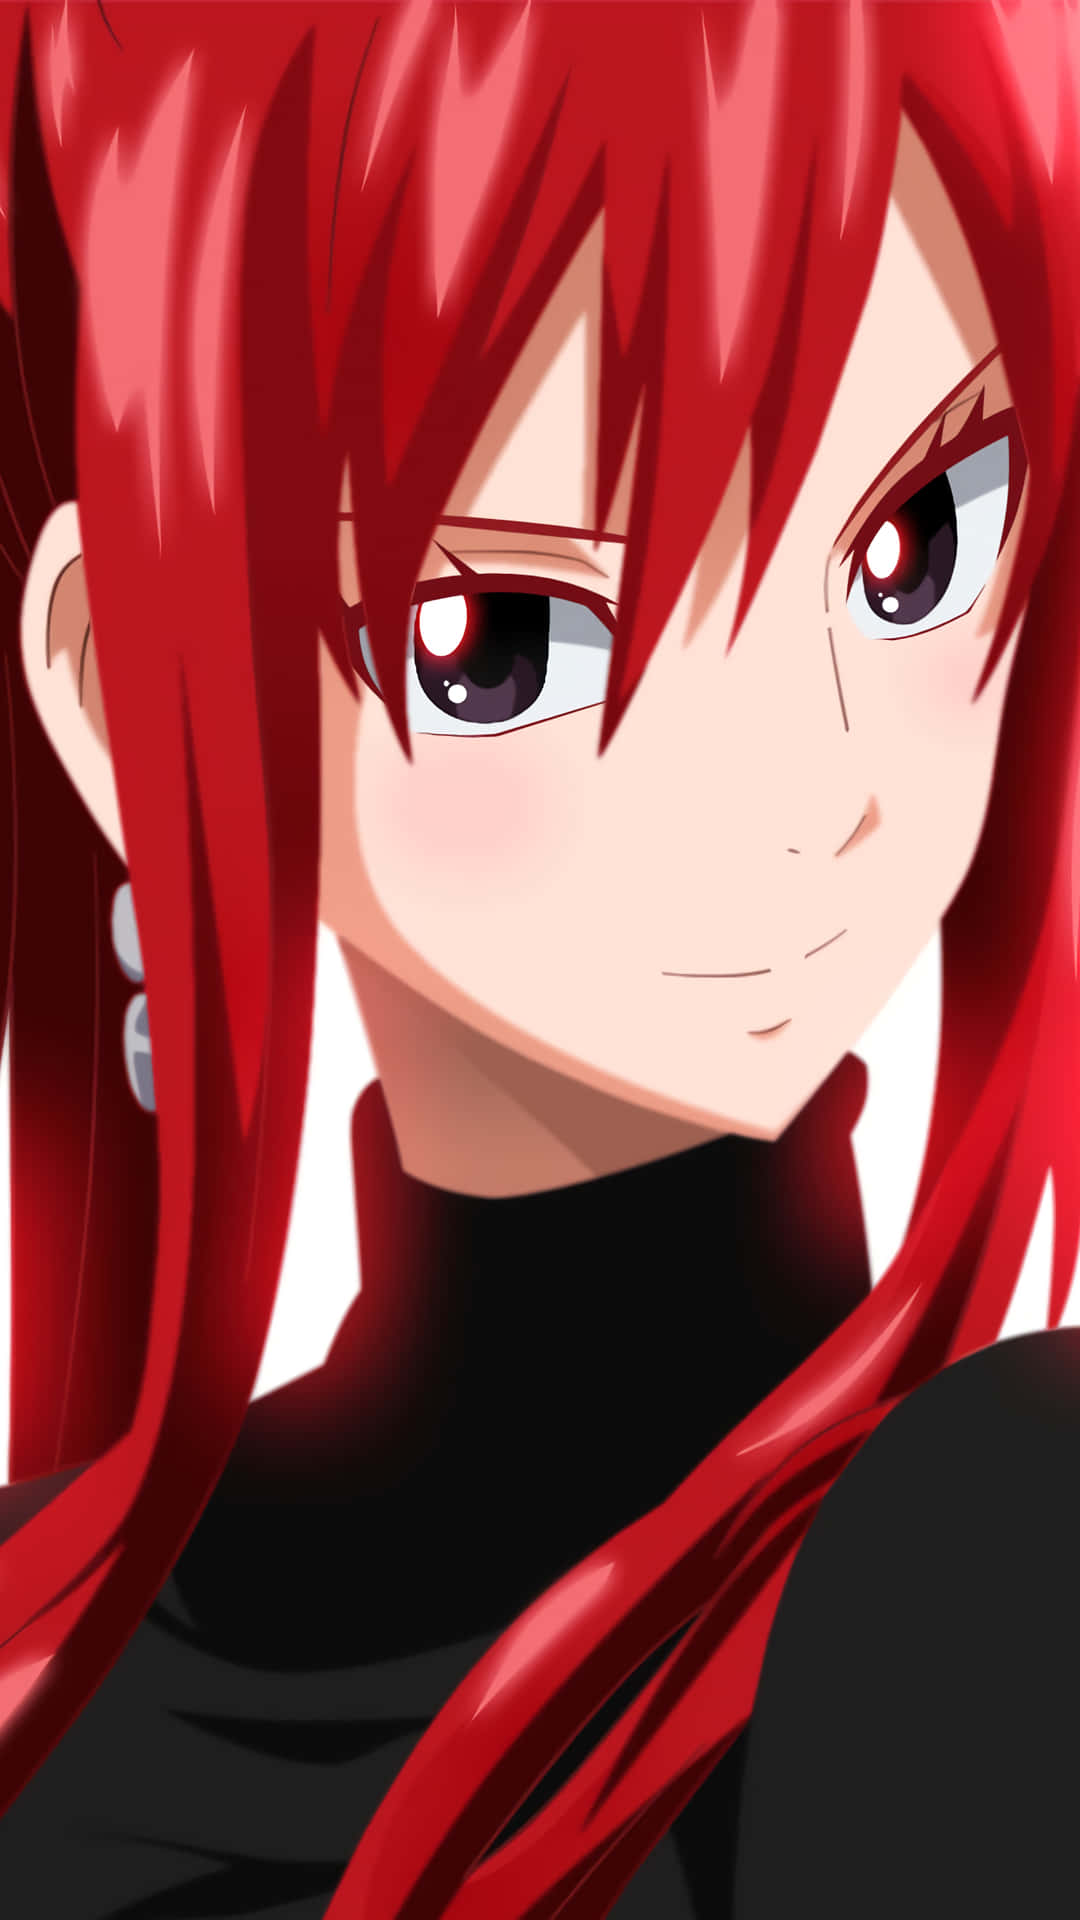 Erza Scarlet ready to fight Wallpaper